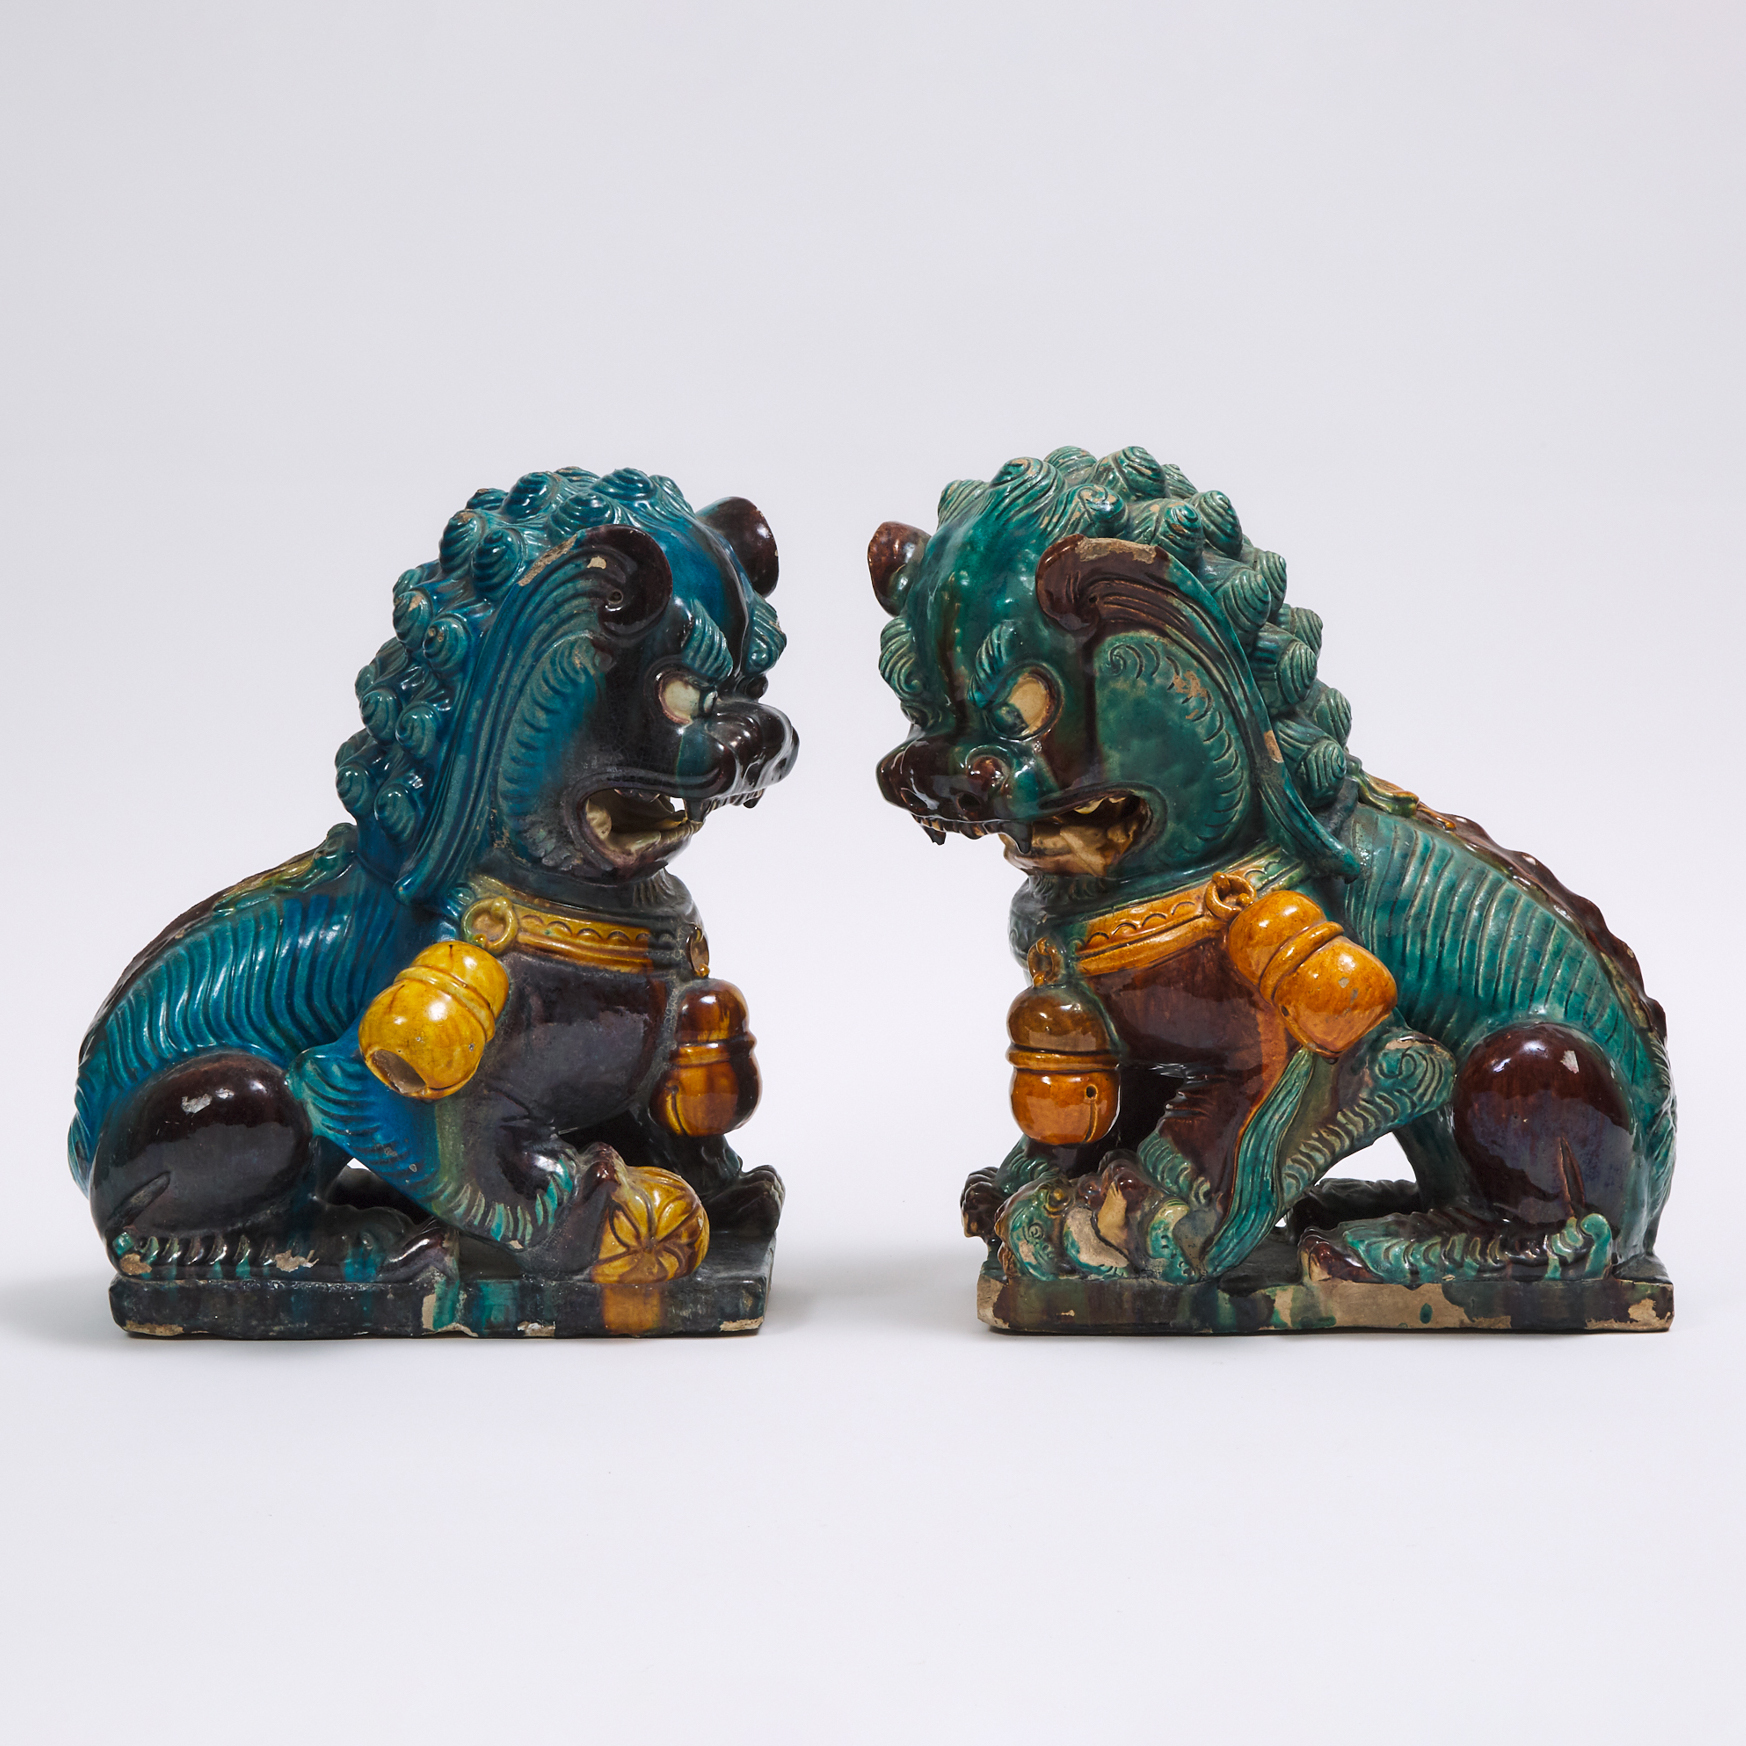 A Pair of Fahua Glazed Guardian Lions, Late Qing Dynasty